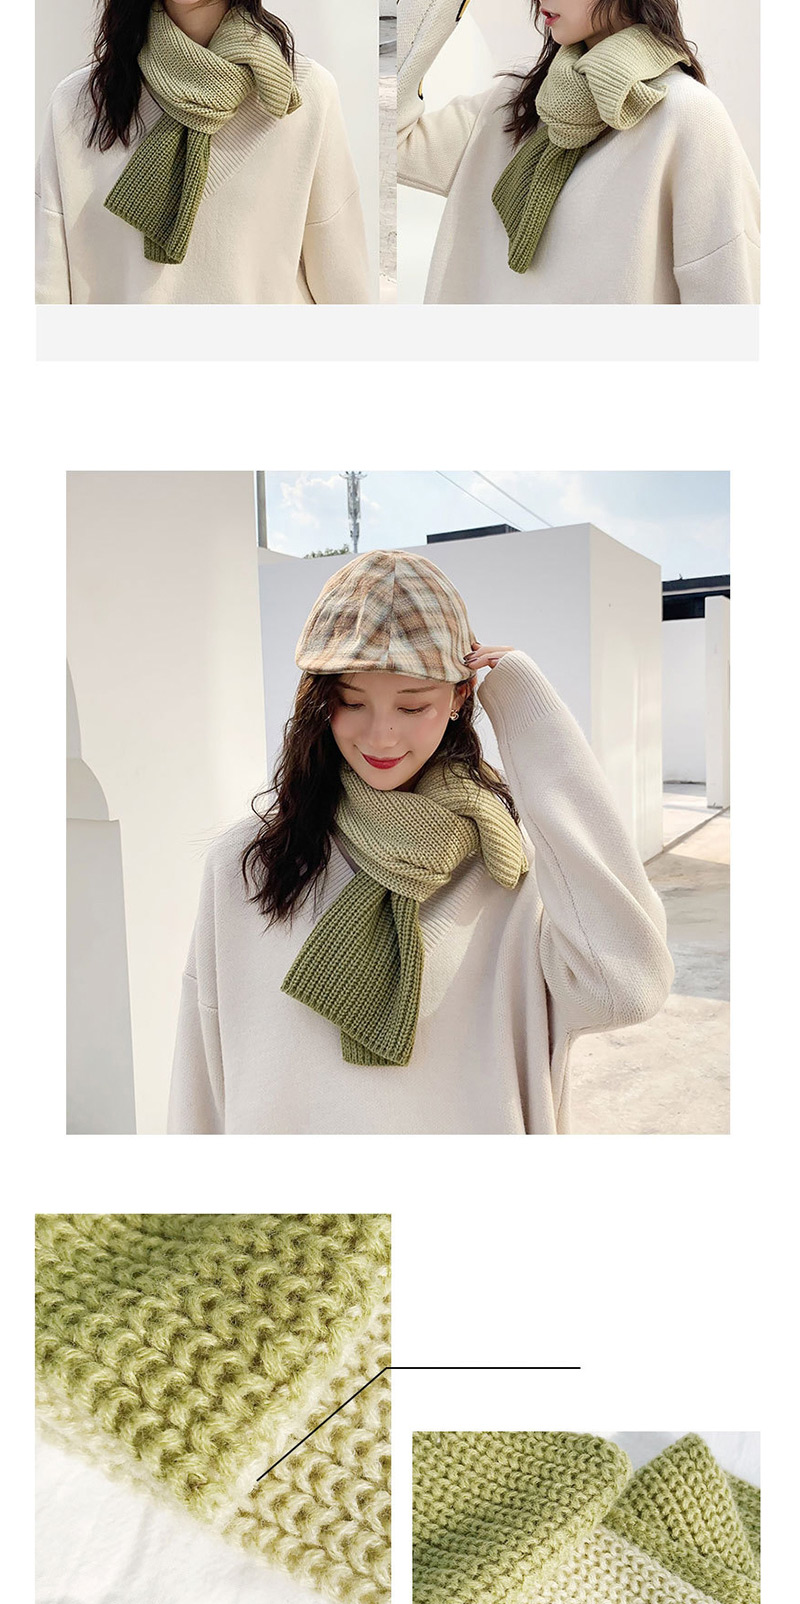 Fashion Two-color Stitching Light Green + Bean Green Stitched Two-tone Knit Short Scarf,knitting Wool Scaves